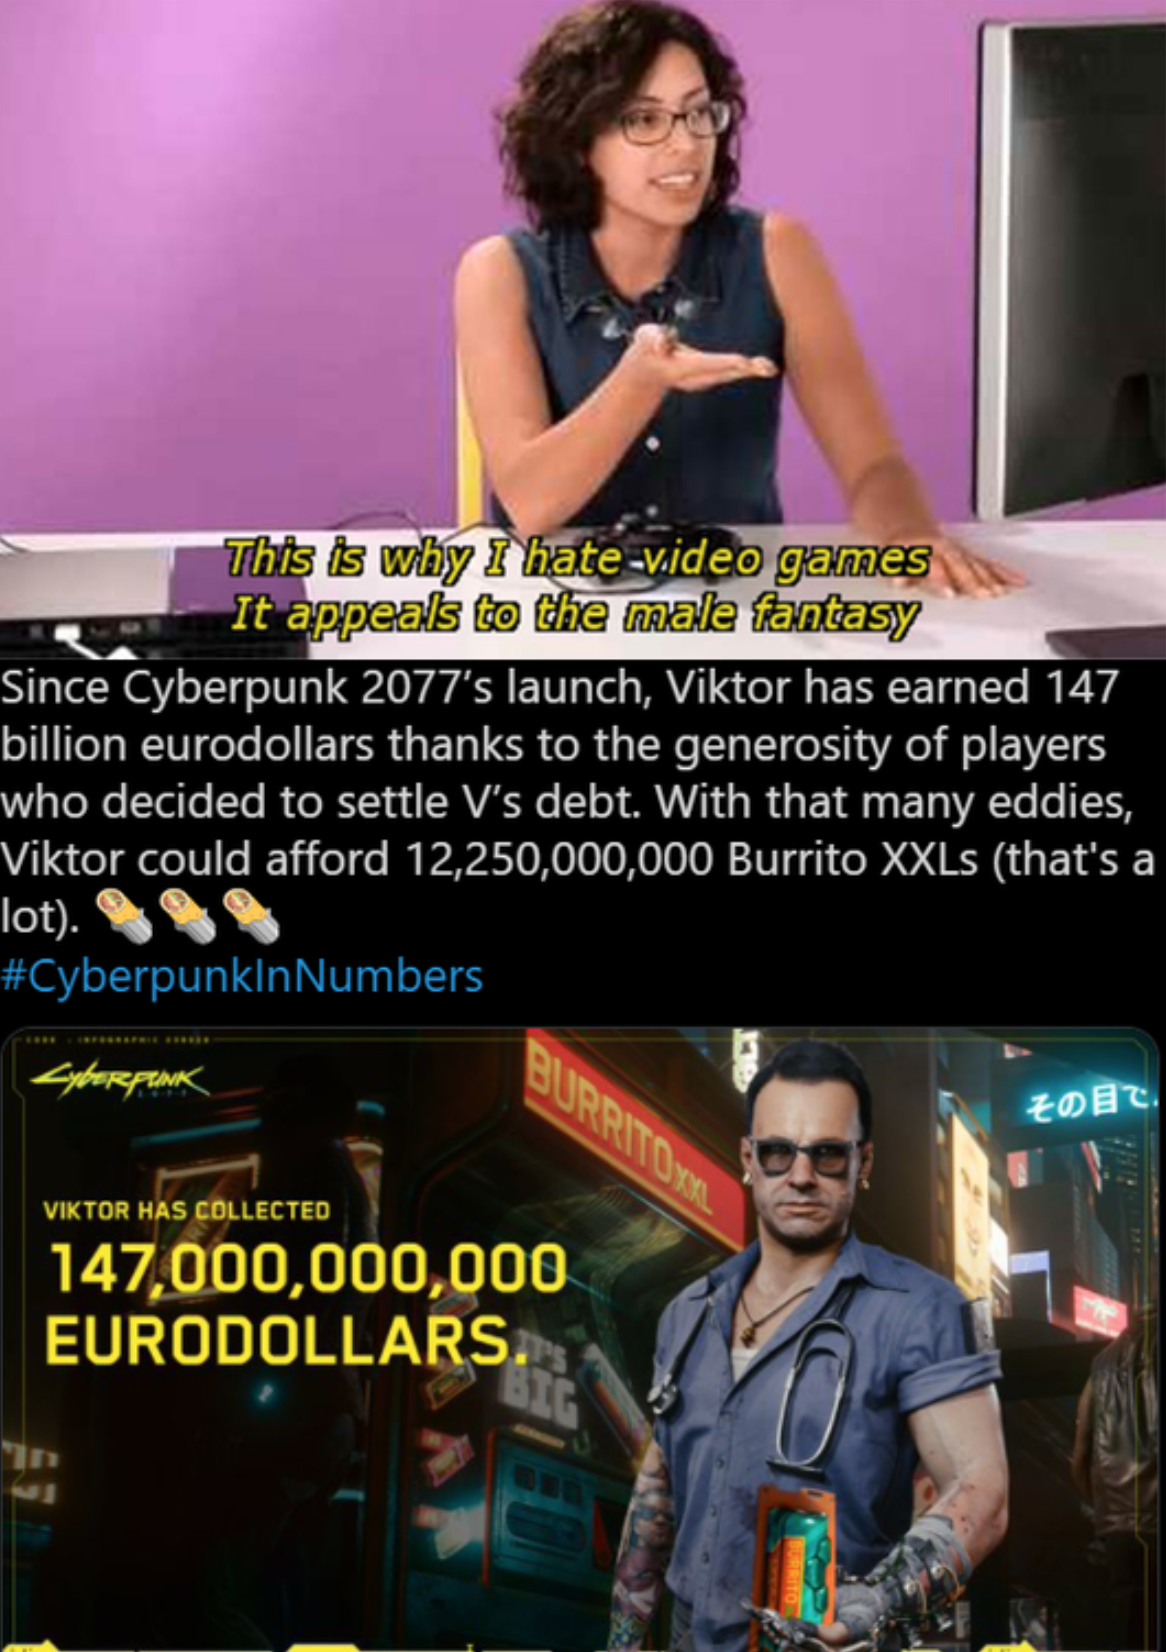 funny gaming memes - male fantasy meme - This is why I hatevideo games It appeals to the male fantasy Since Cyberpunk 2077's launch, Viktor has earned 147 billion eurodollars thanks to the generosity of players who decided to settle V's debt. With that ma